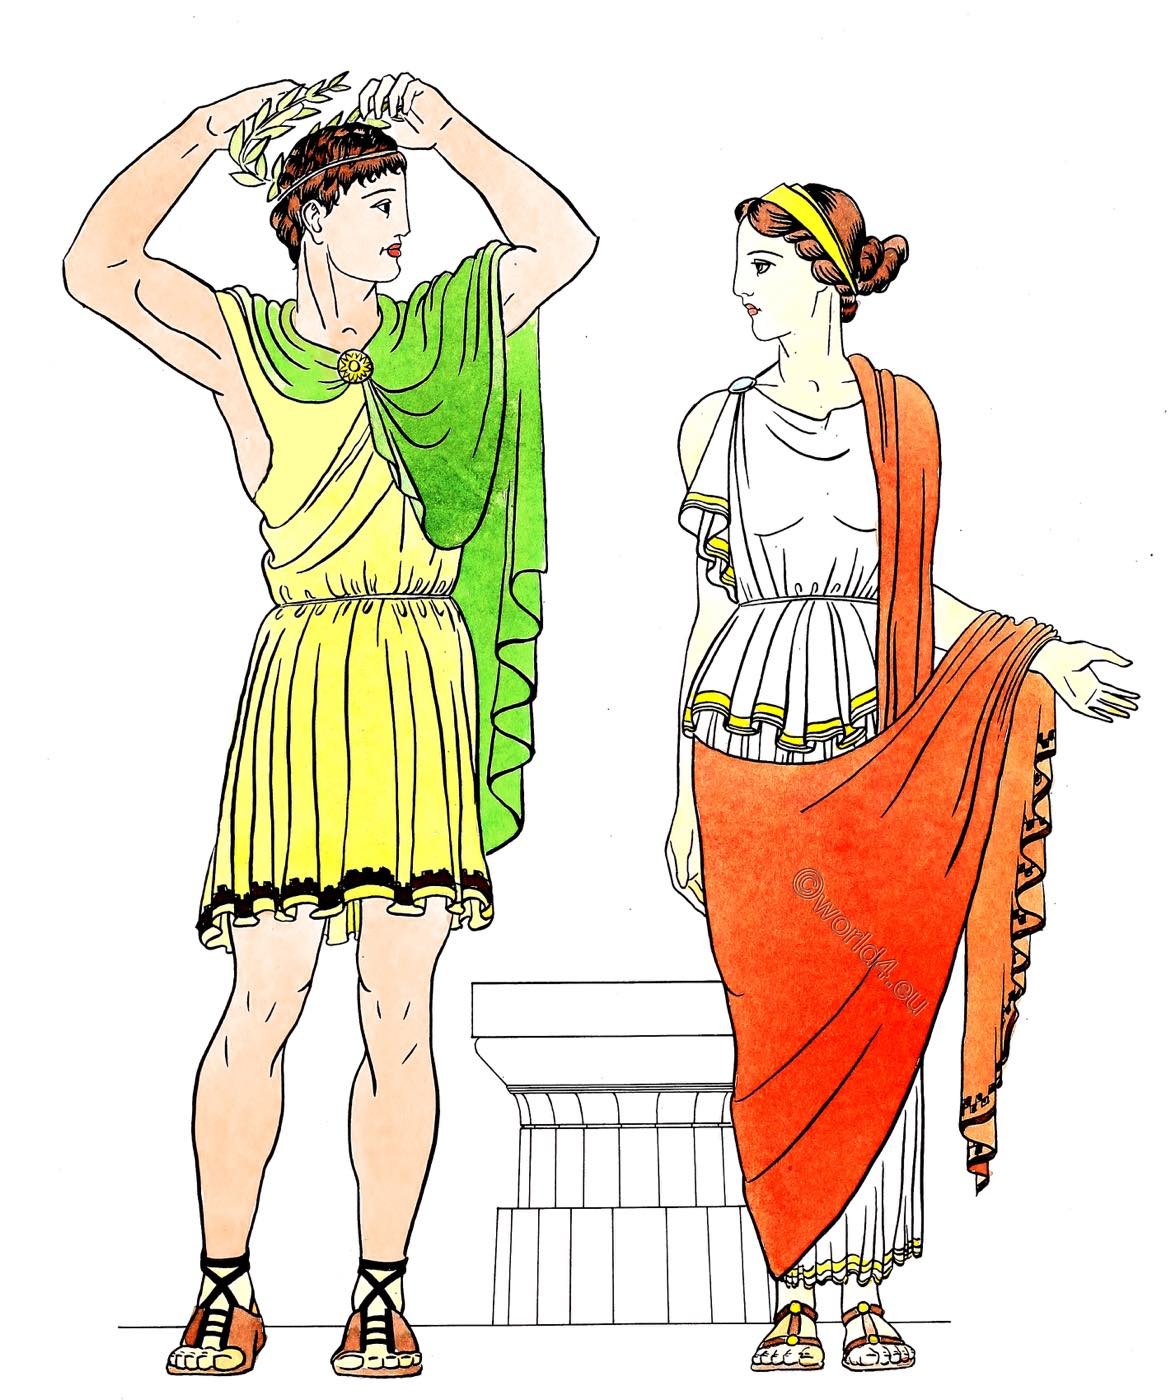 Greek doric. Costumes during the so-called Golden Age of Greece.